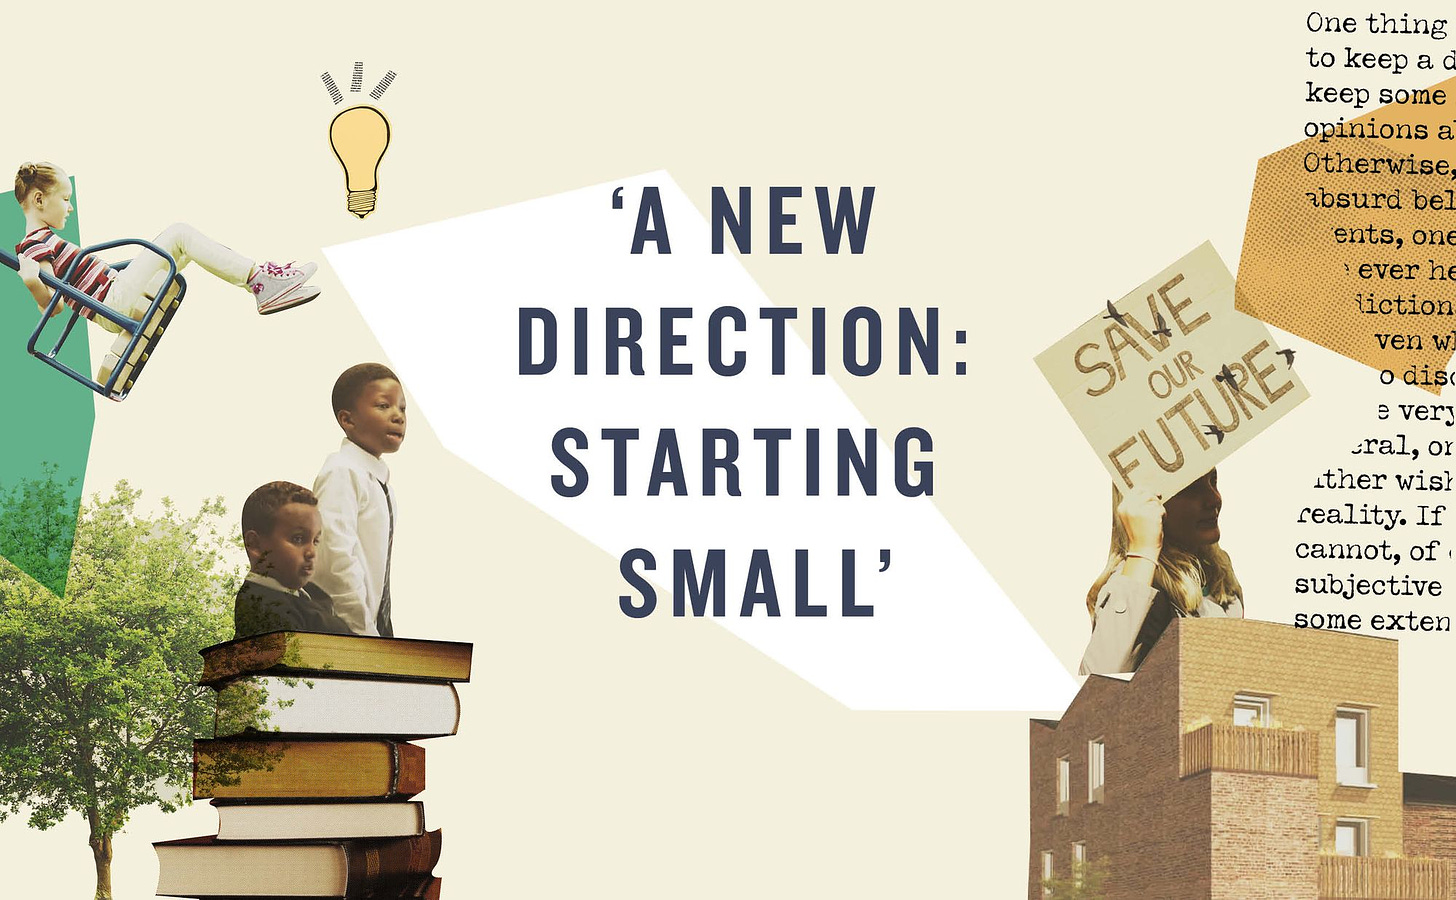 'A New Direction: Starting Small' - Reflections on this year's theme (1)